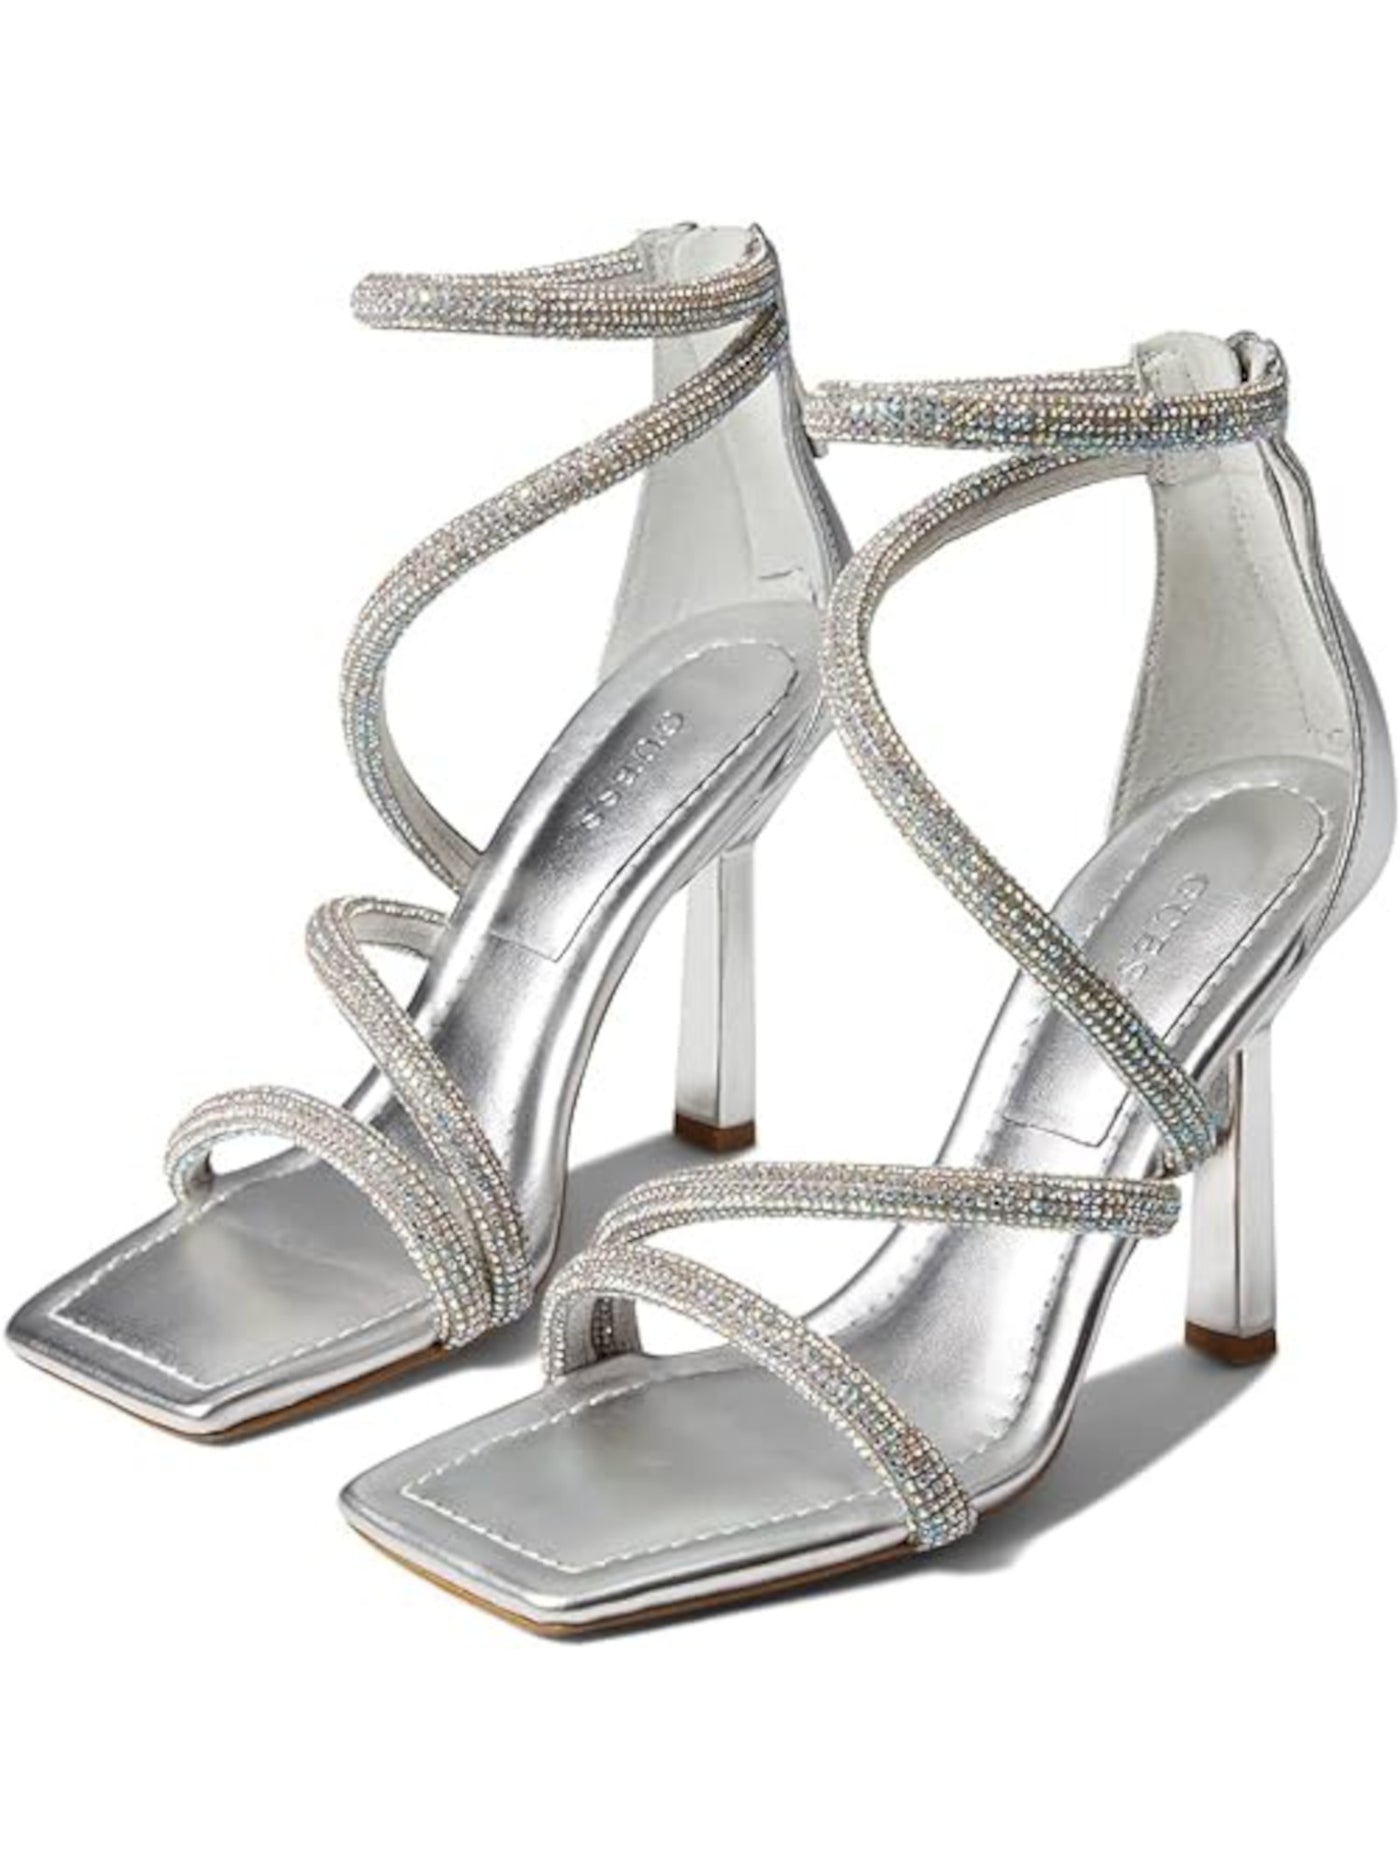 GUESS Womens Silver Padded Ankle Strap Embellished Lalali Square Toe Zip-Up Dress Heeled Sandal 5.5 M